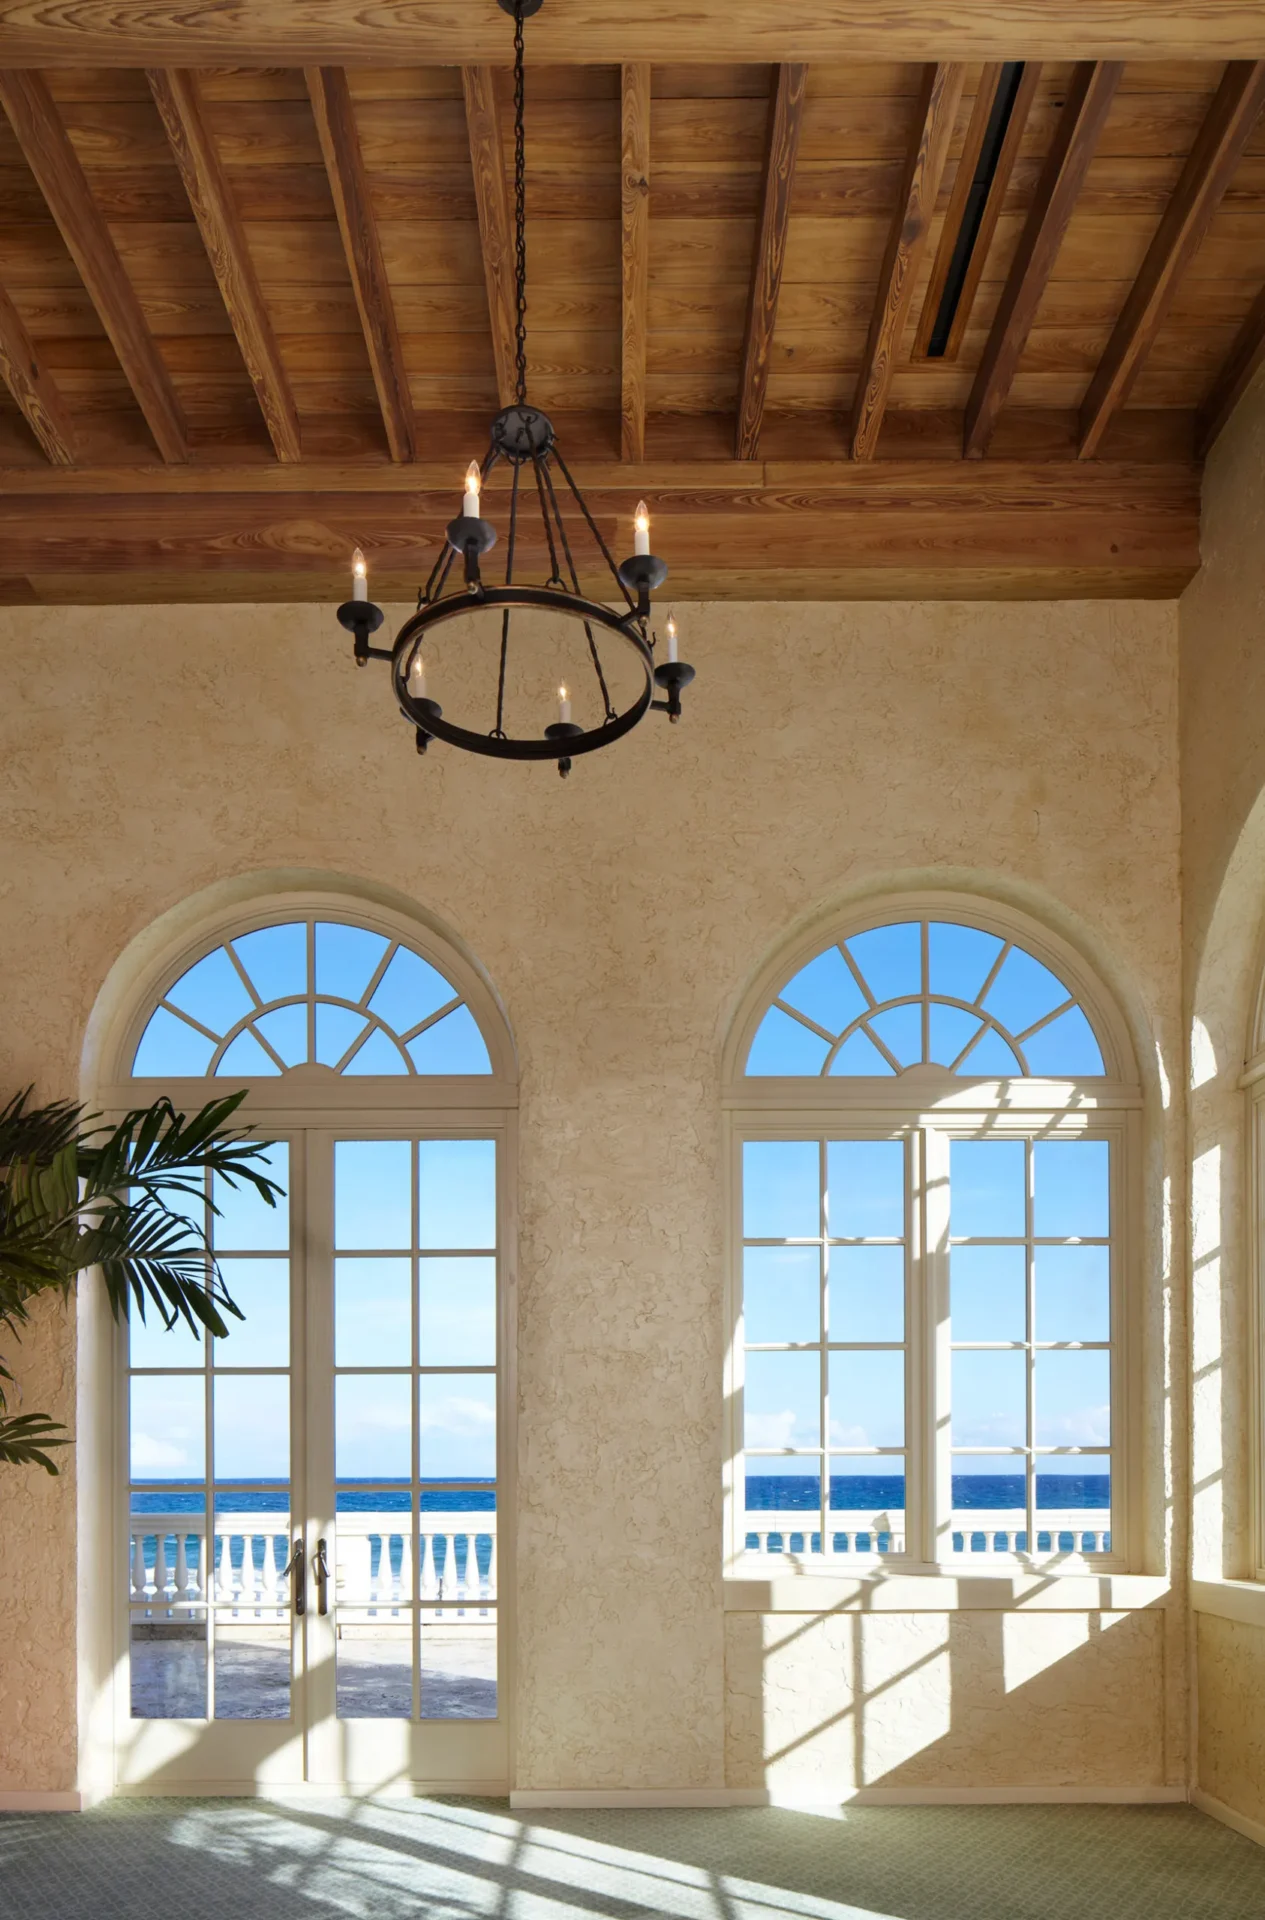 A chandelier hangs above two windows in the center of an indoor room.